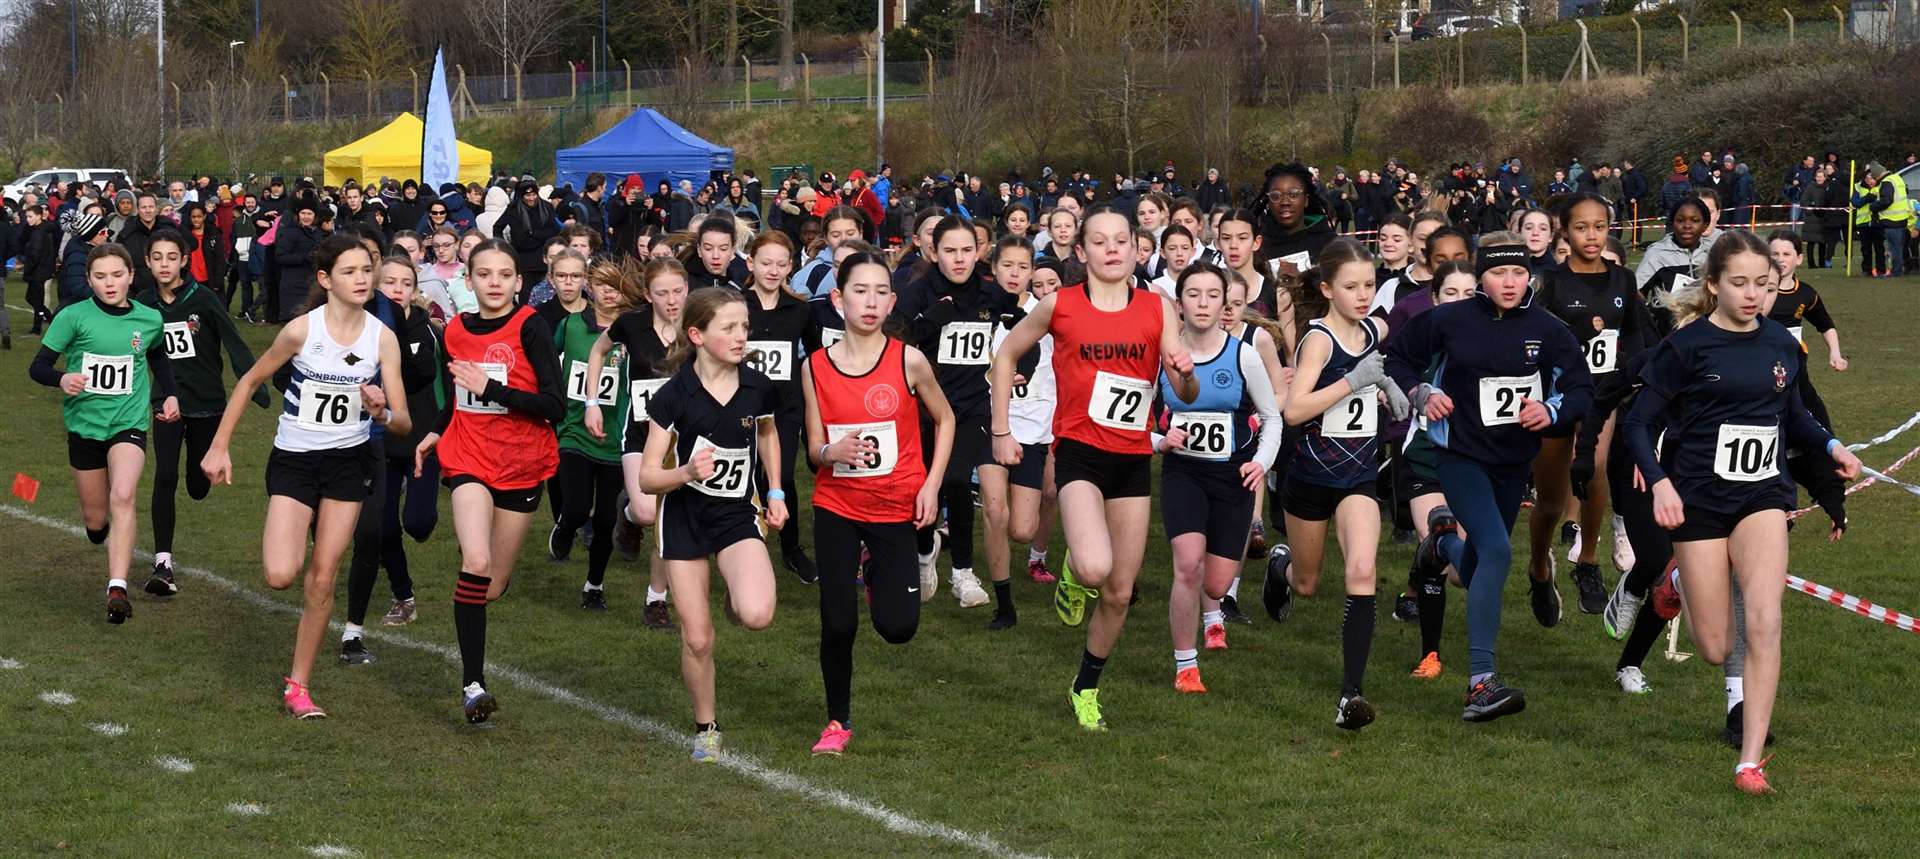 The Year 7 girls get their race under way. Picture: Simon Hildrew